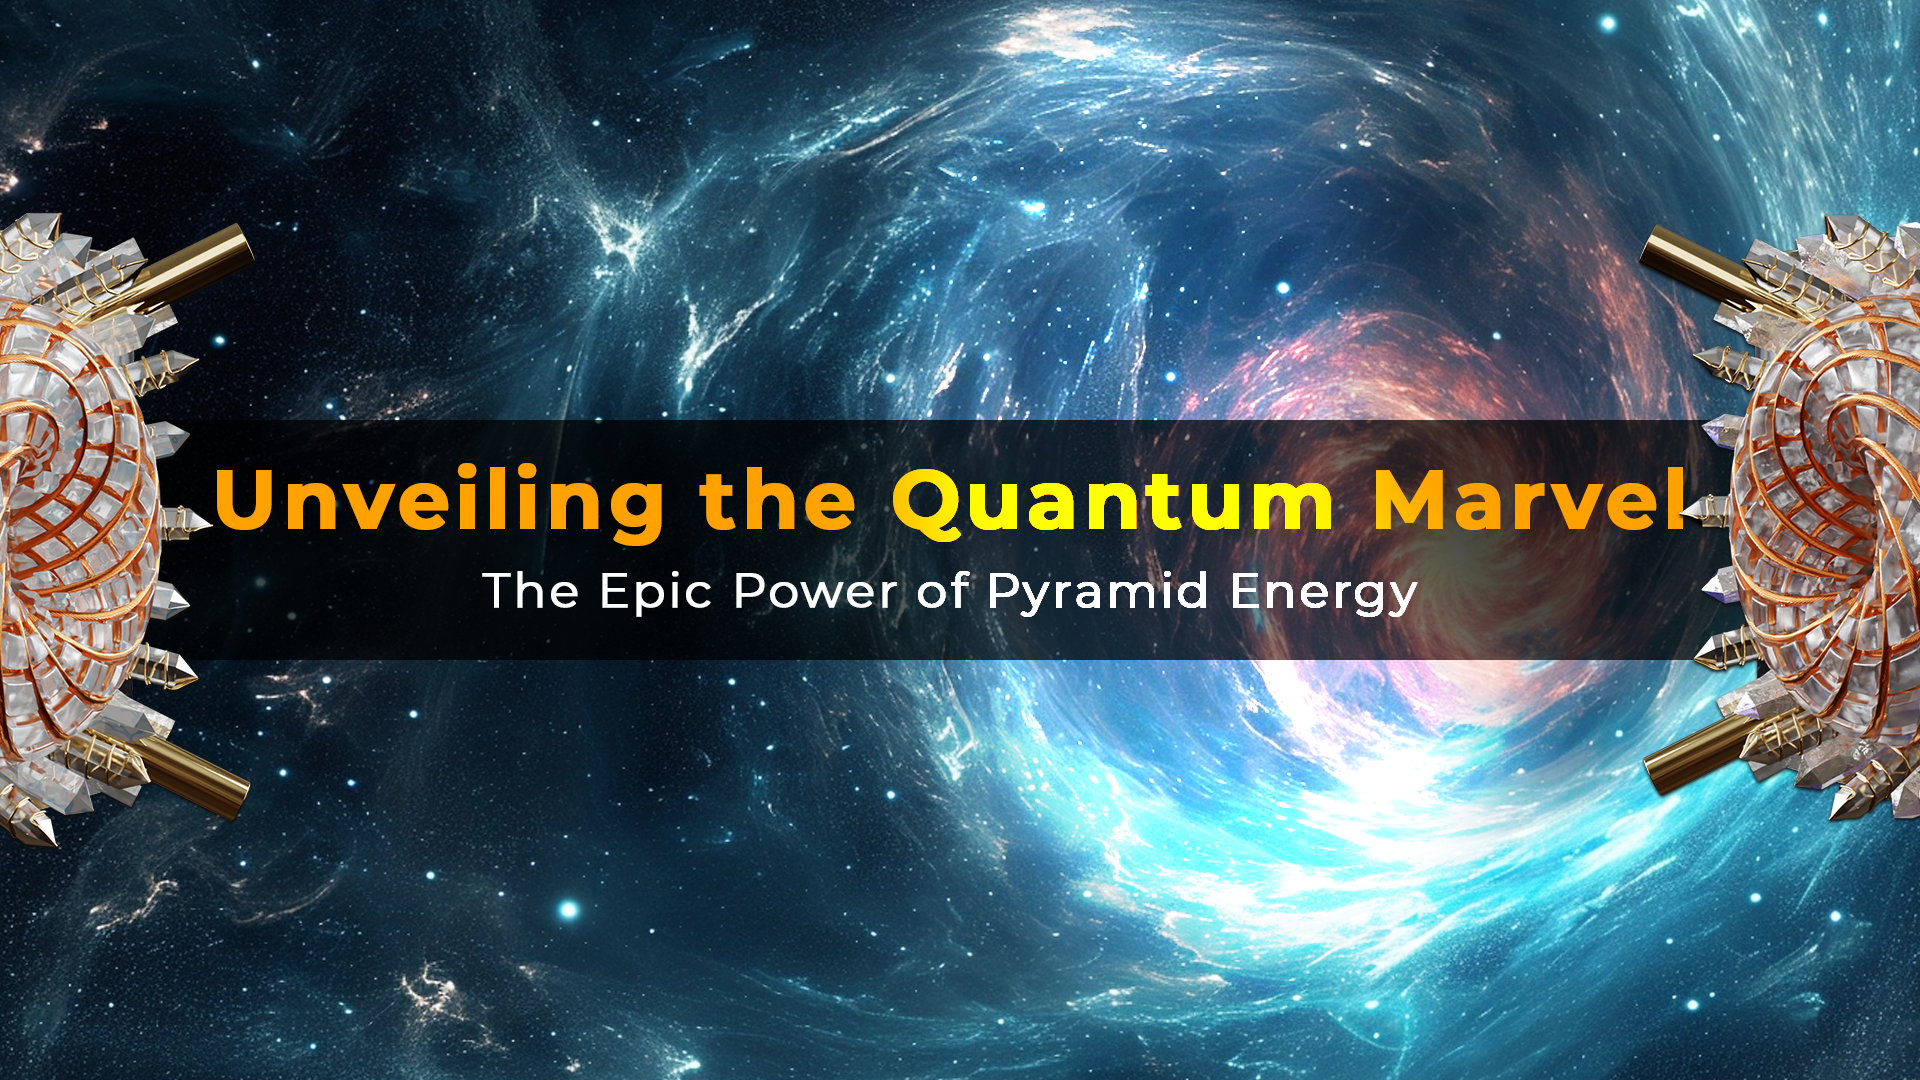 Unveiling the Quantum Marvel: The Epic Power of Pyramid Energy